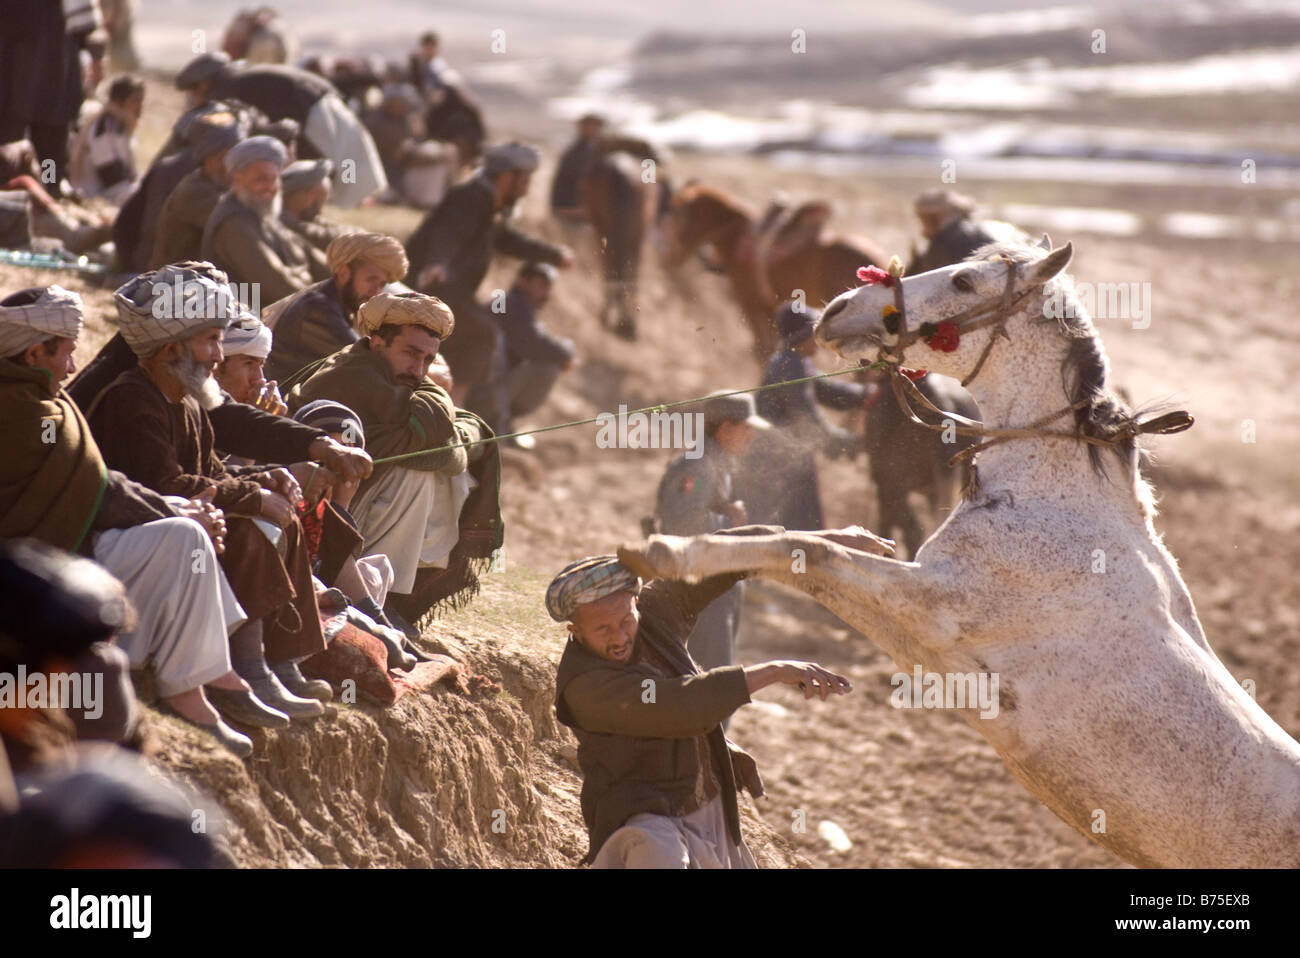 Afghan horsemen take part in the traditional Buzkashi game in Maimana Afghanistan on Tuesday 19th February 2008. Stock Photo